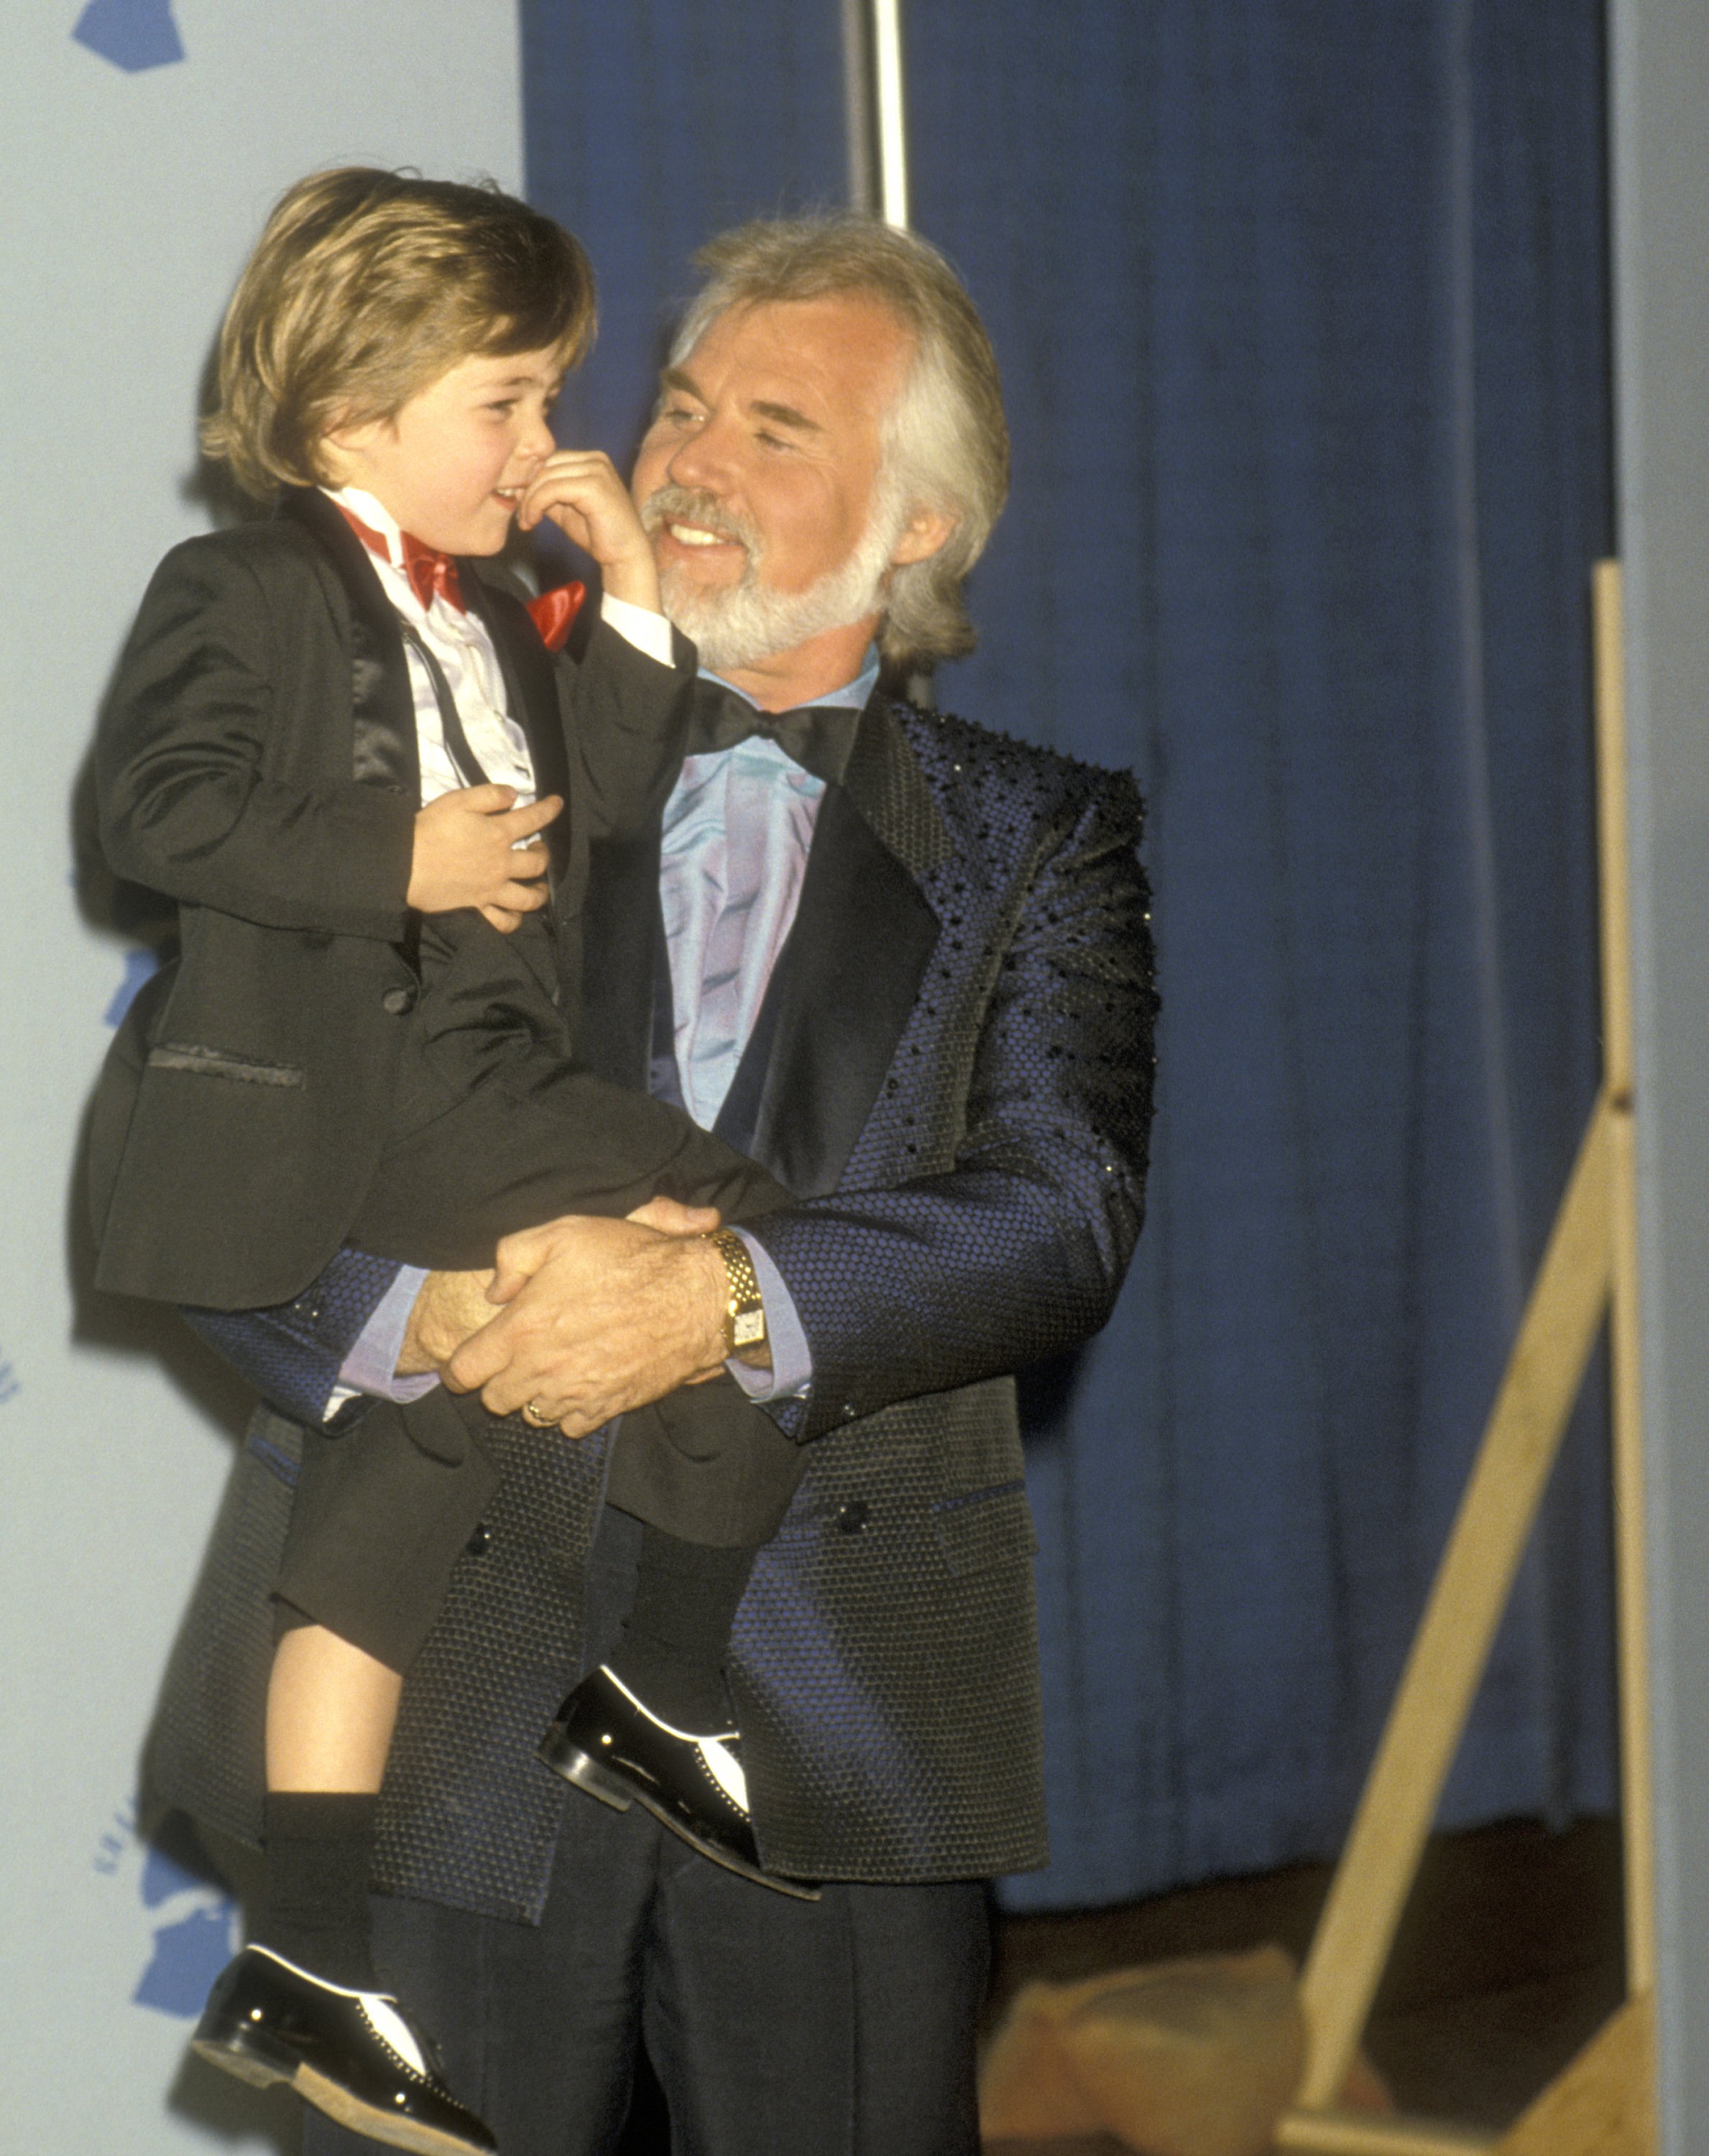 Kenny Rogers and son Christopher Gordon attend the 28th Annual Grammy Awards on February 25, 1986 at Shrine Auditorium in Los Angeles, California. | Photo: Getty Images